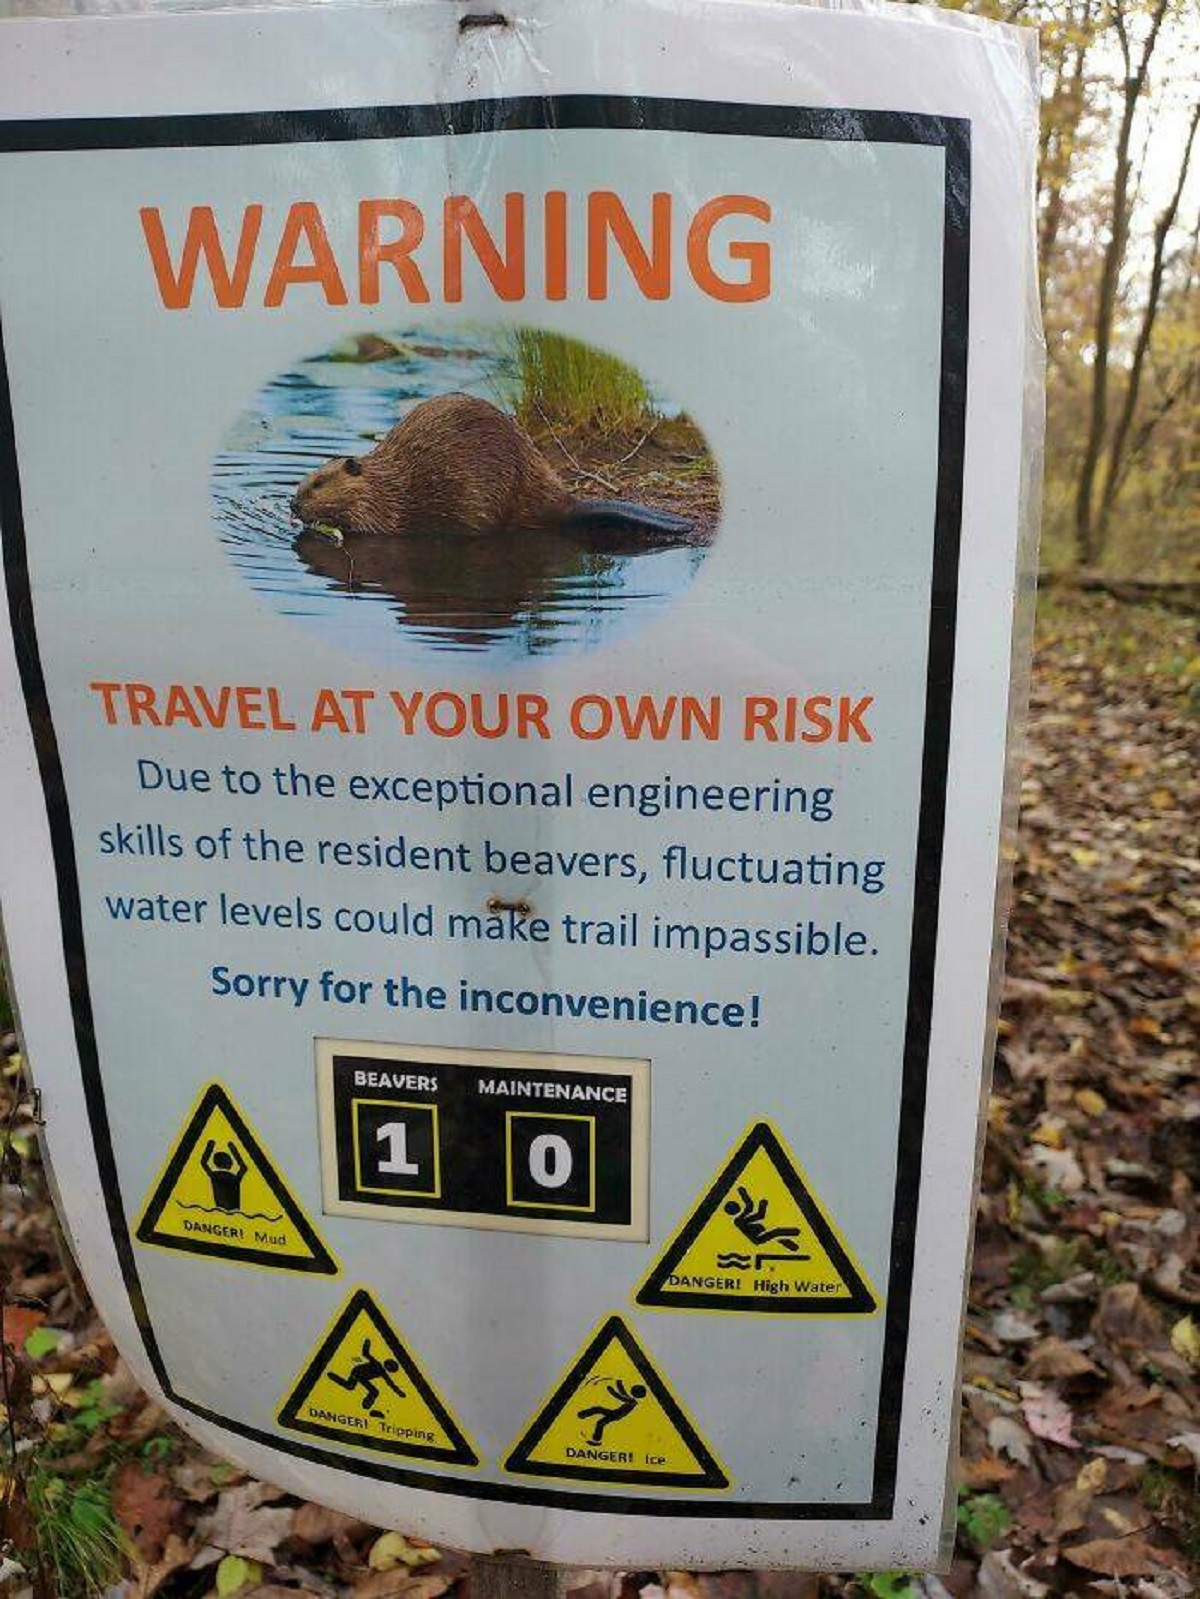 fascinating photos - tree - Warning Travel At Your Own Risk Due to the exceptional engineering skills of the resident beavers, fluctuating water levels could make trail impassible. Sorry for the inconvenience! ww Beavers Maintenance 1 0 bent W